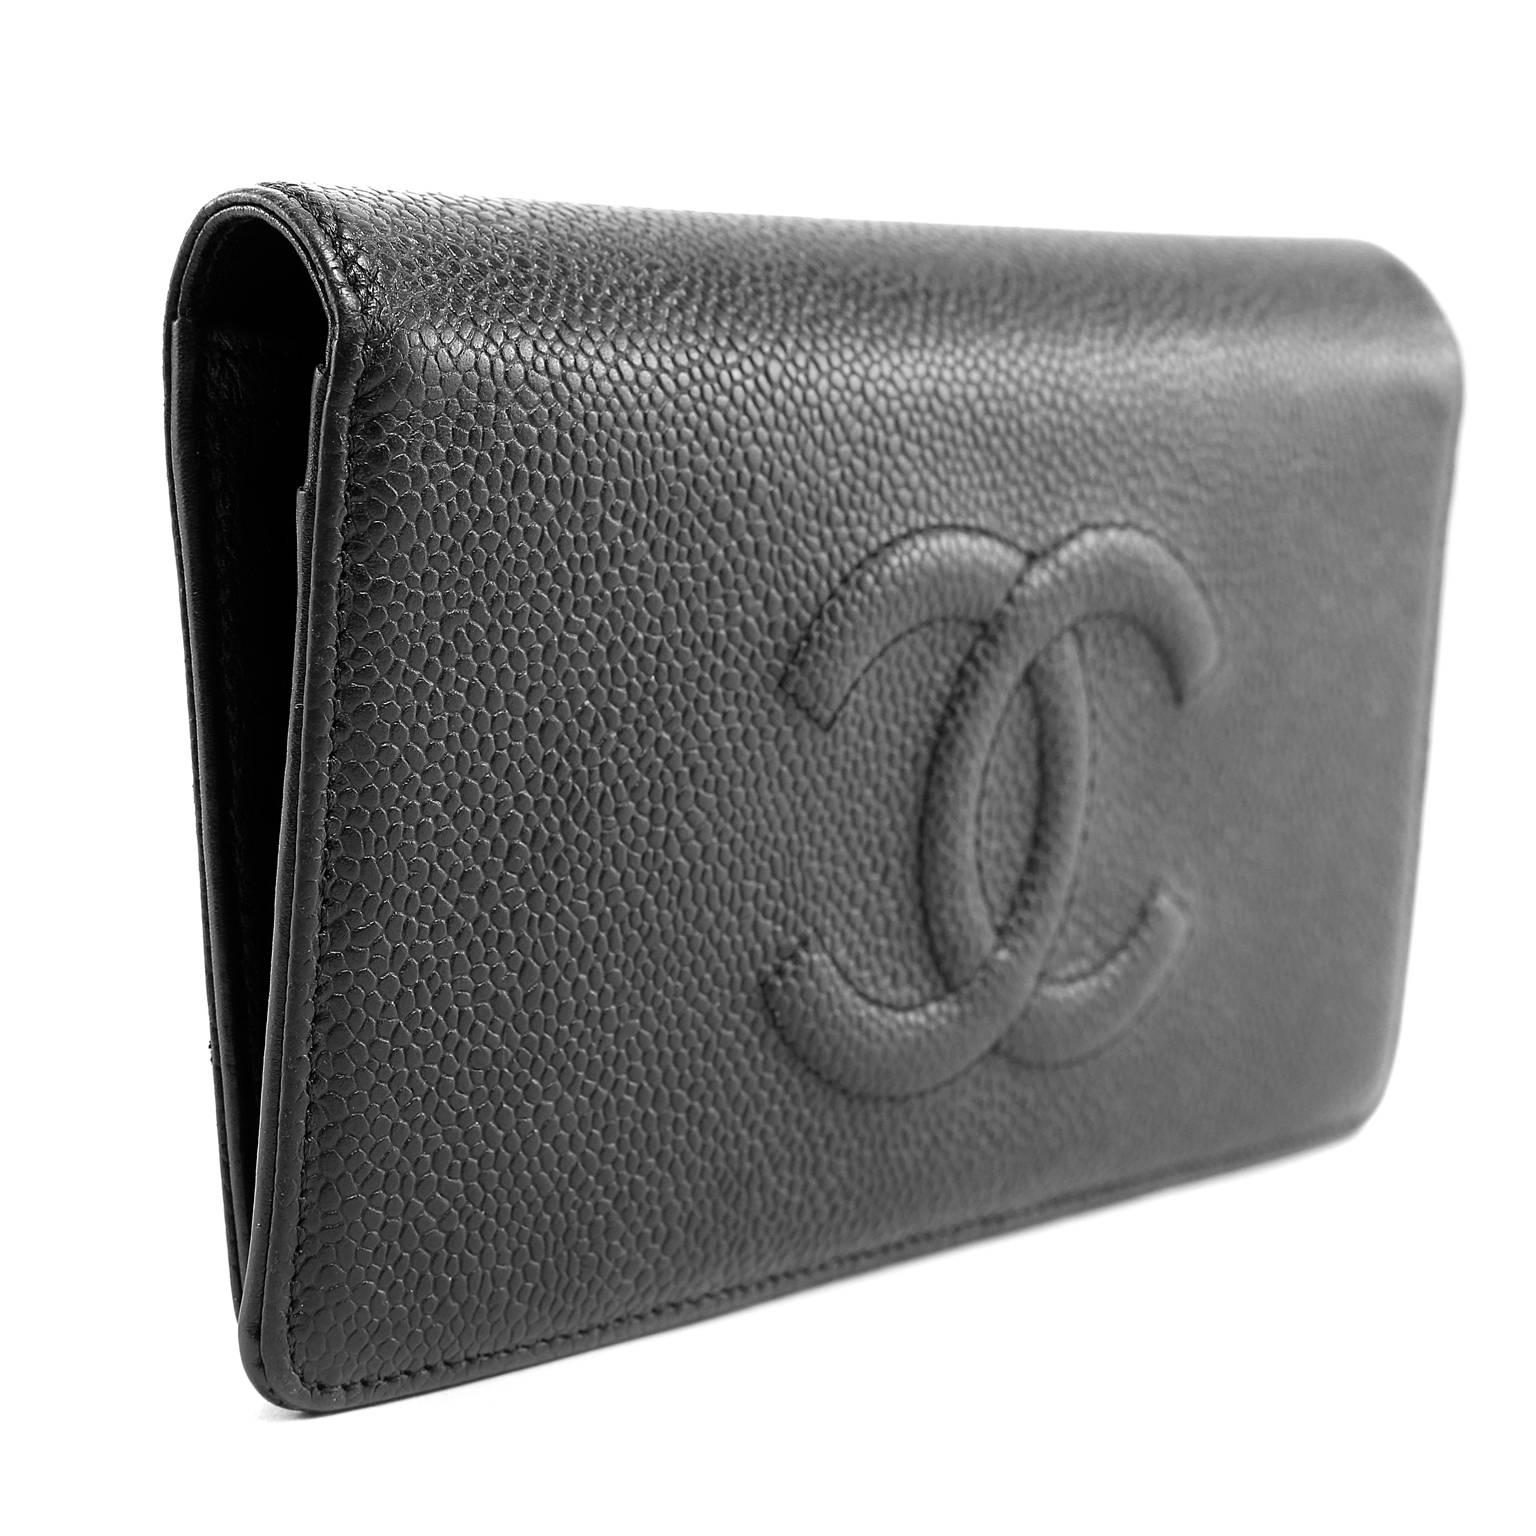 Chanel Black Caviar Large Bifold Wallet In New Condition For Sale In Malibu, CA